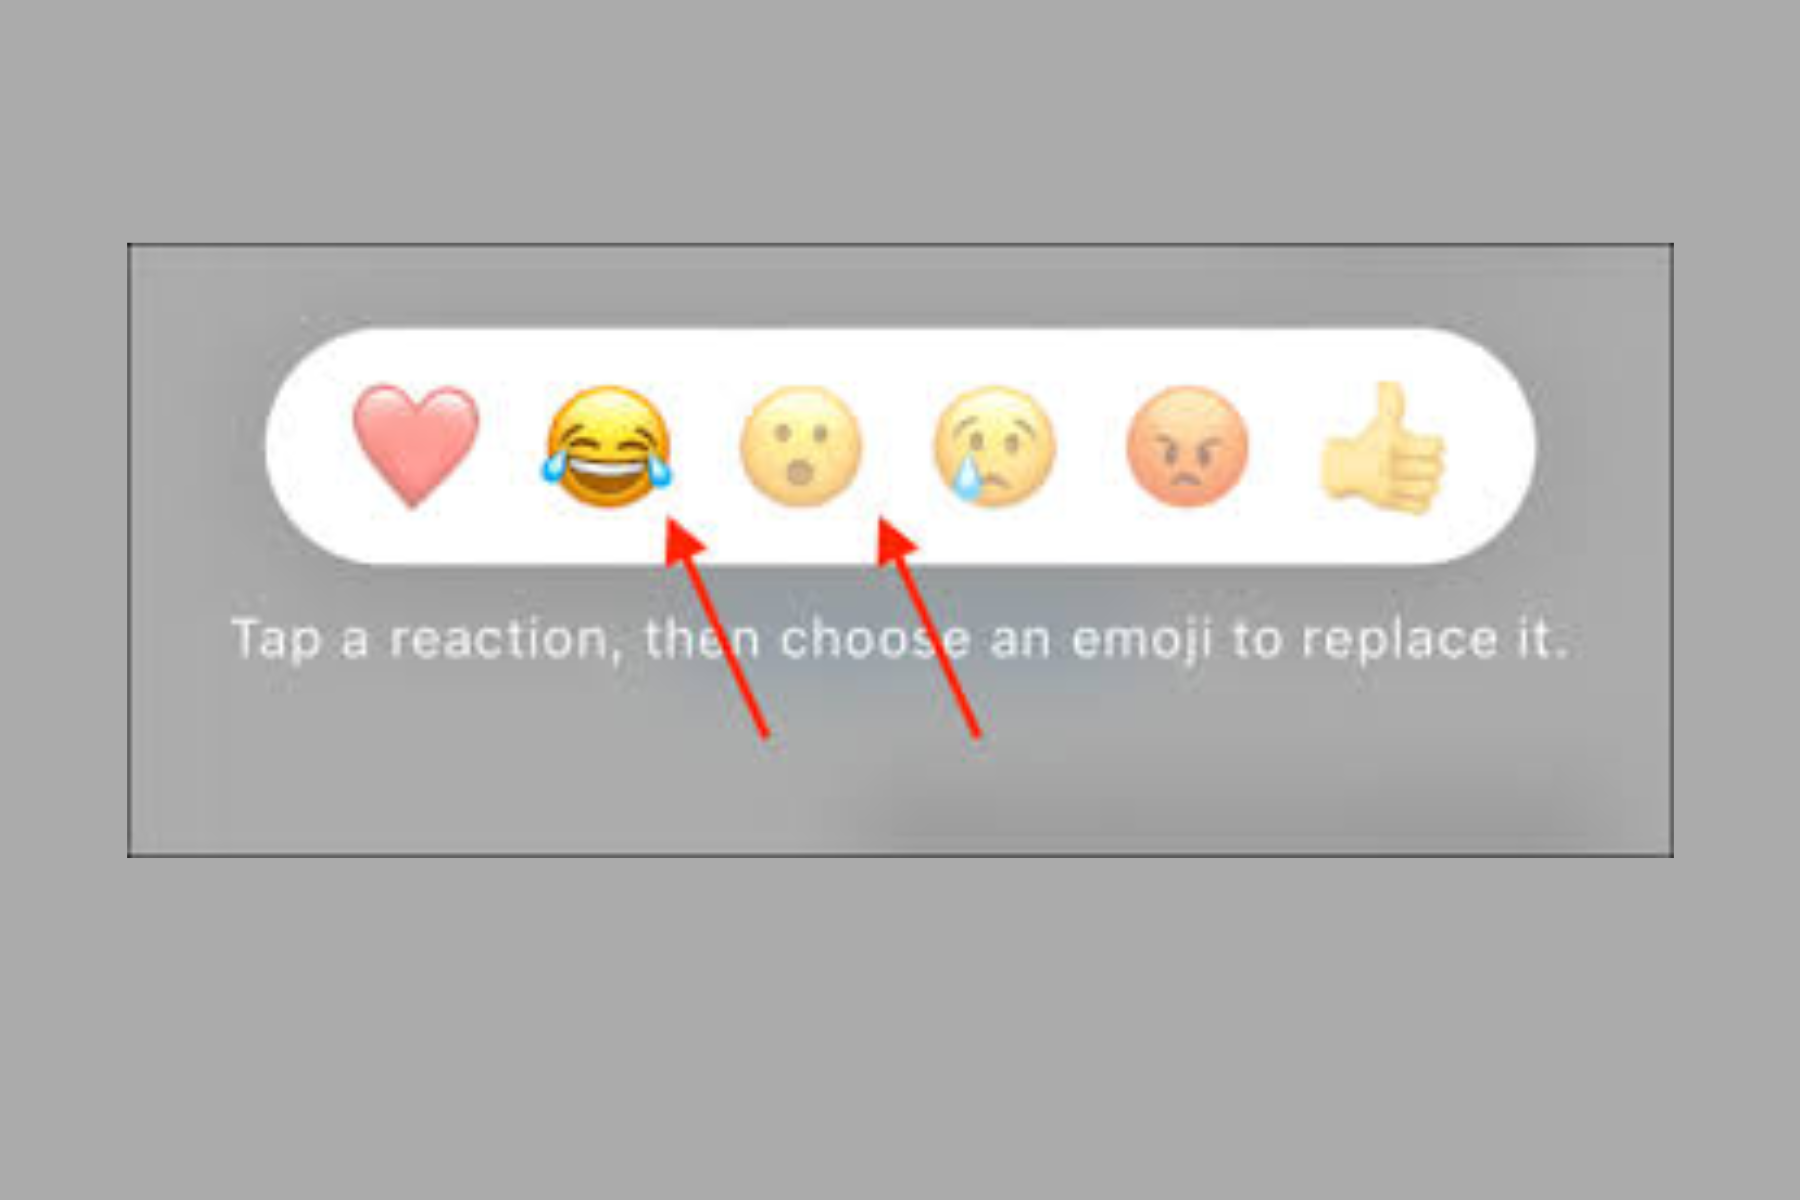 Choices of Instagram reactions highlighting the laugh reaction